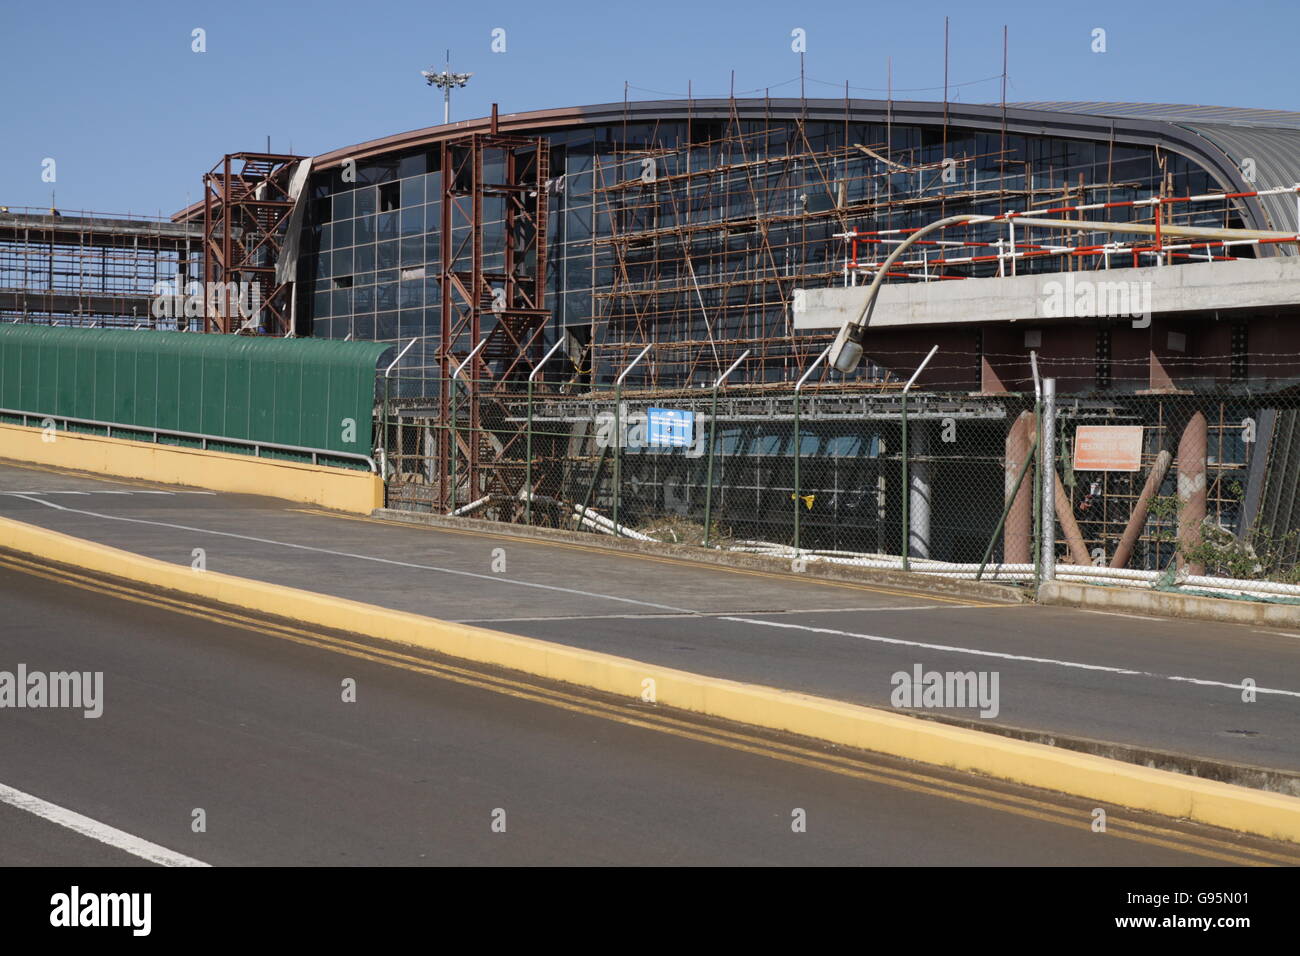 Ssr Int. Airport. Under Construction.  Mauritius Stock Photo